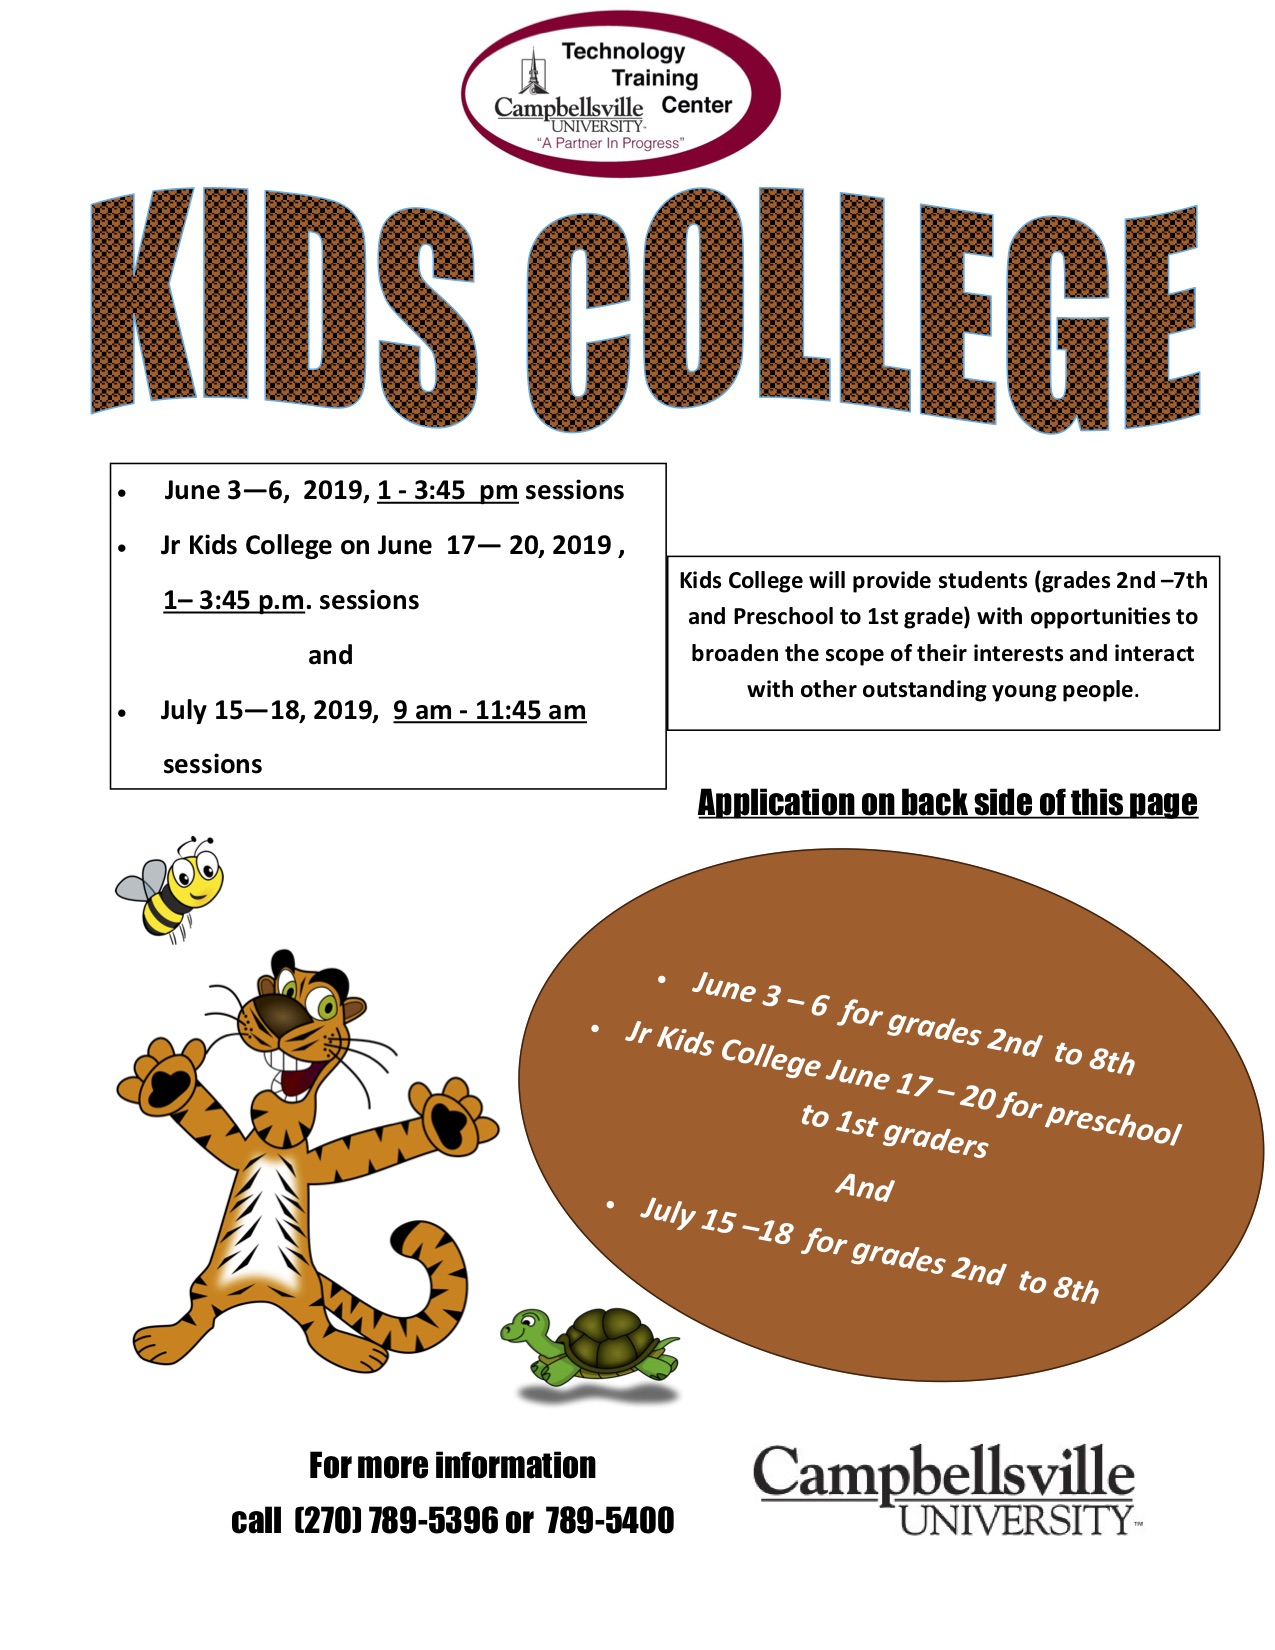 Campbellsville University Kids College to be held in June and July on campus